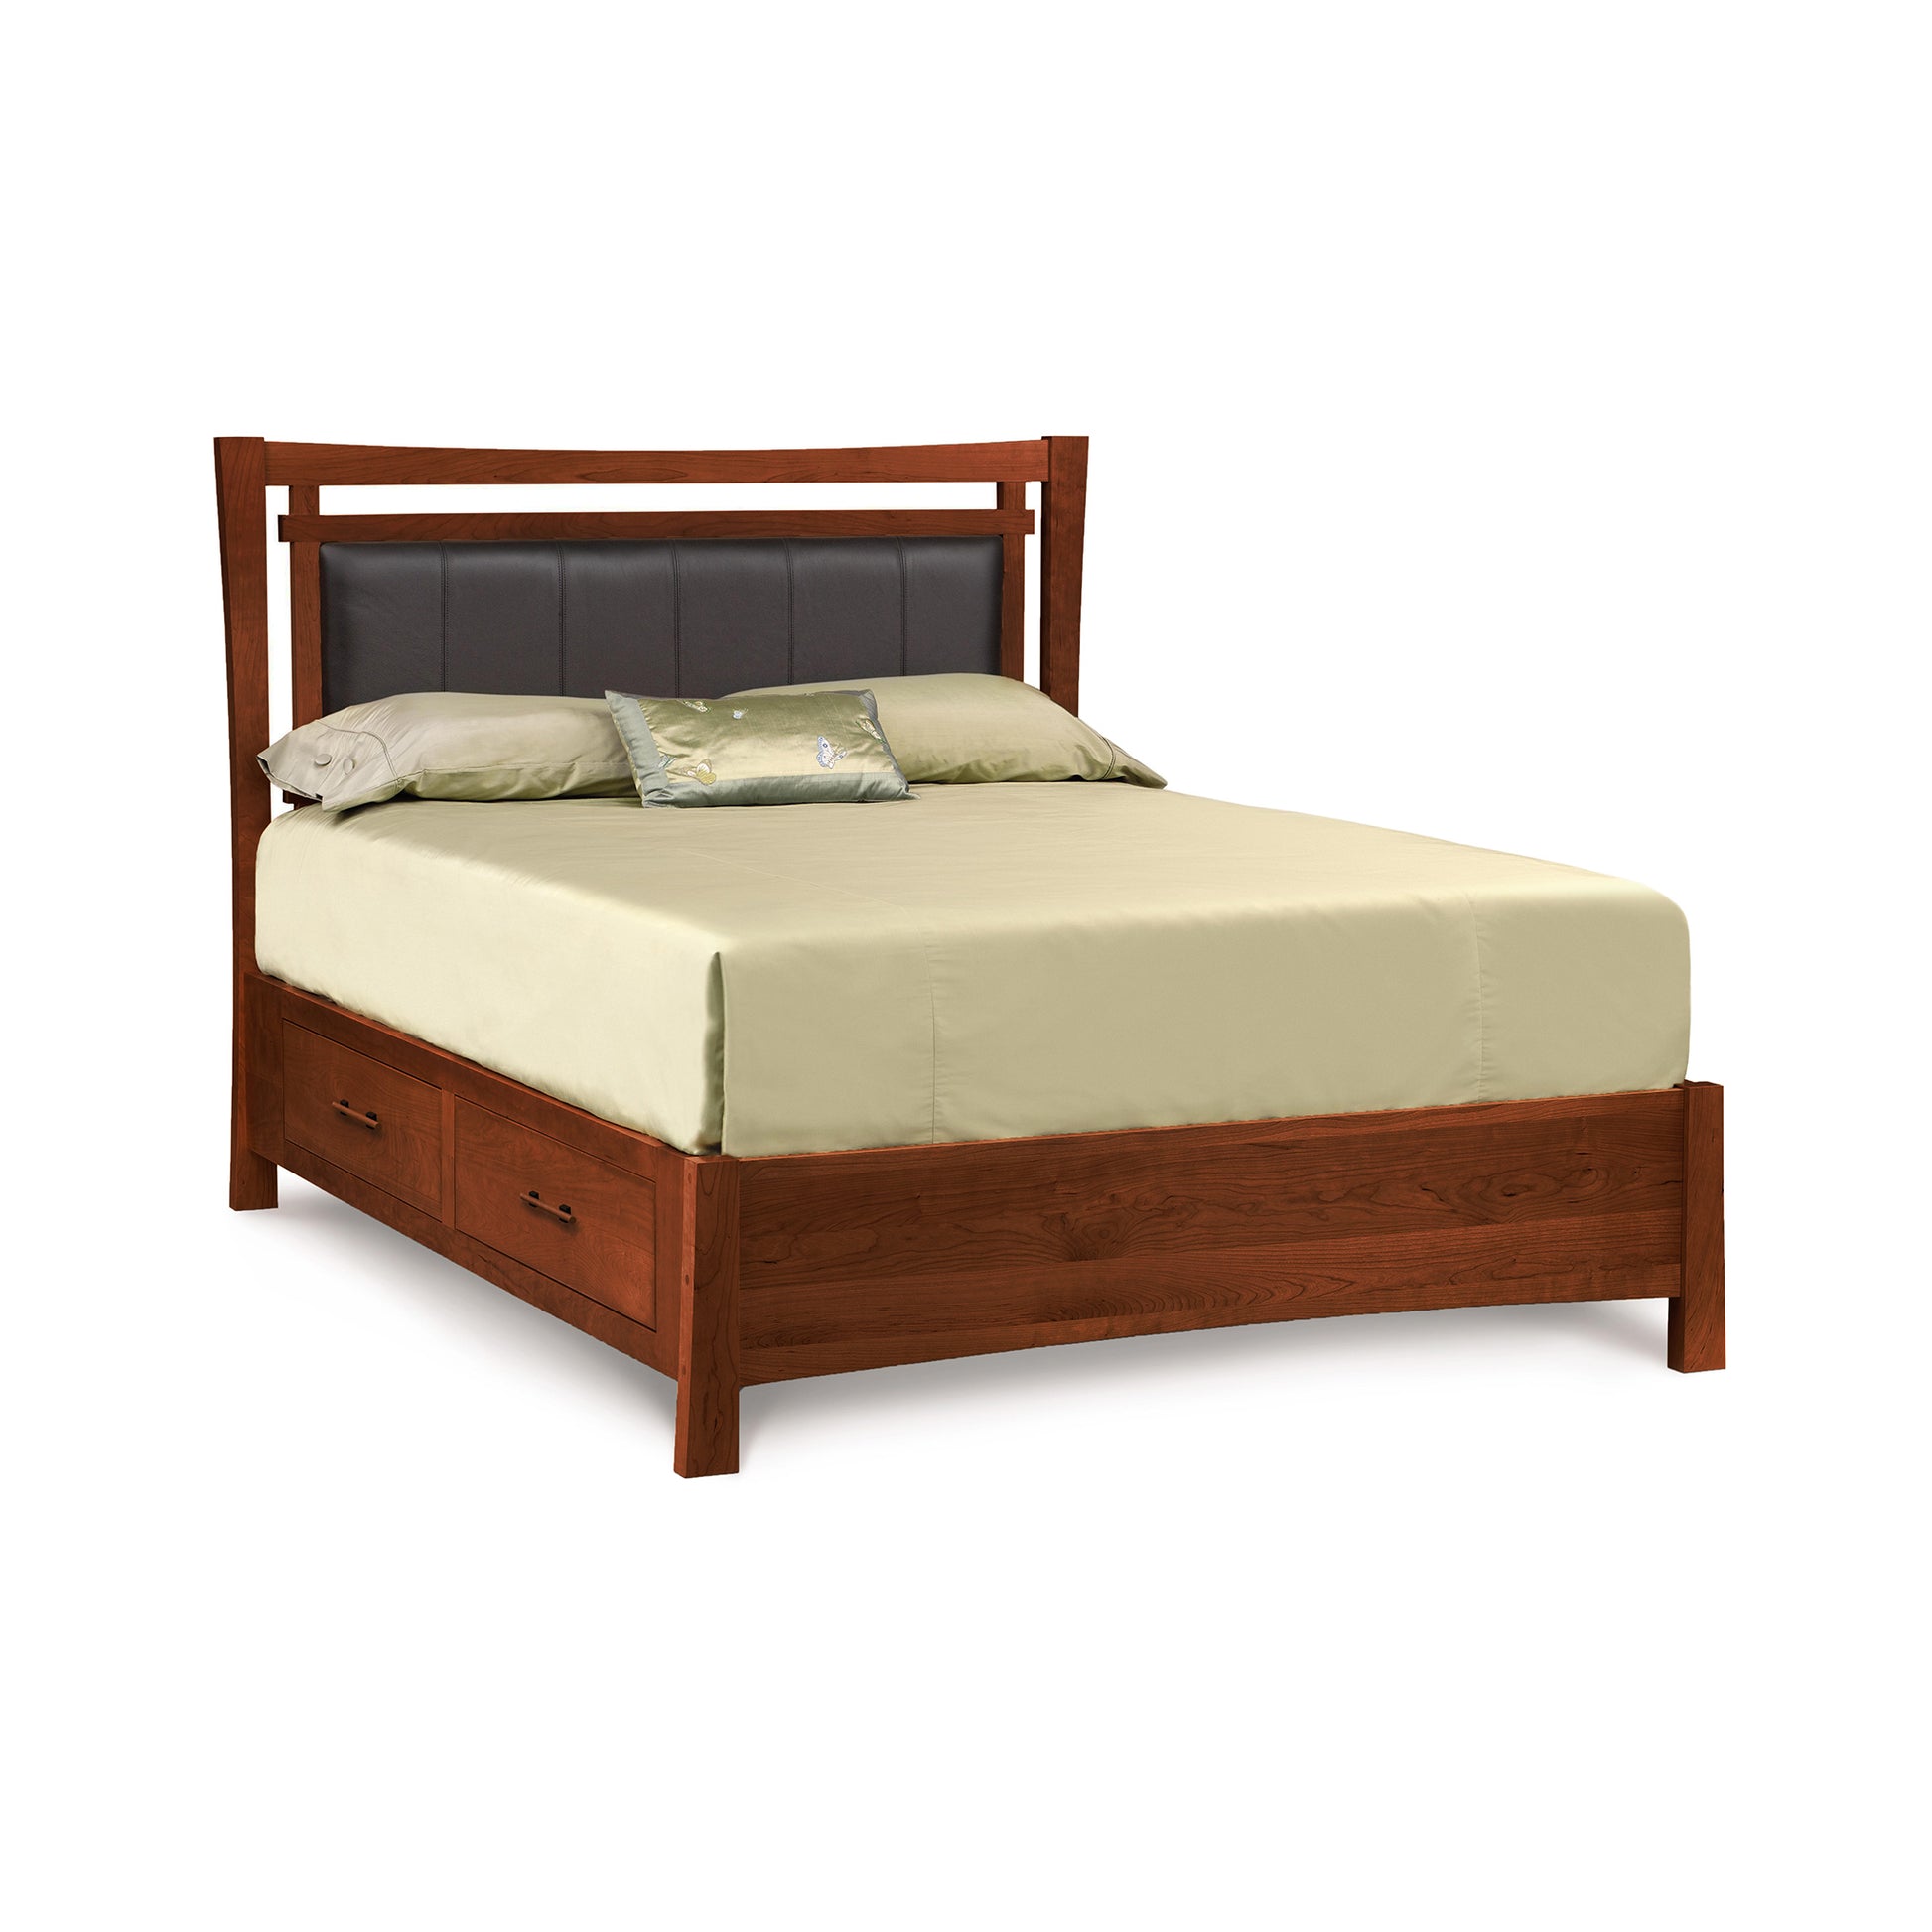 A solid cherry wood queen-size Copeland Furniture Monterey Storage Bed with Upholstered Headboard, dressed with pale yellow bedding and a few decorative pillows, featuring two drawers at the foot of the bed for storage.